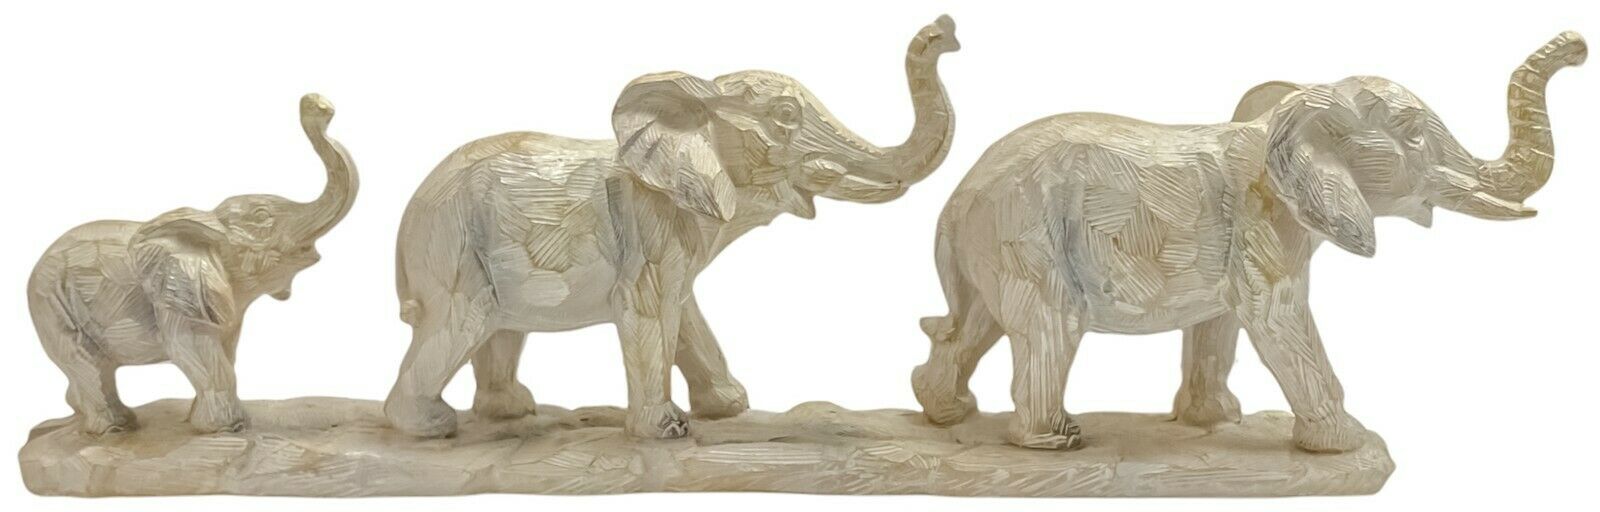 Brown Elephant Family Ornament Driftwood Effect Sculpture Resin Animal Figurine